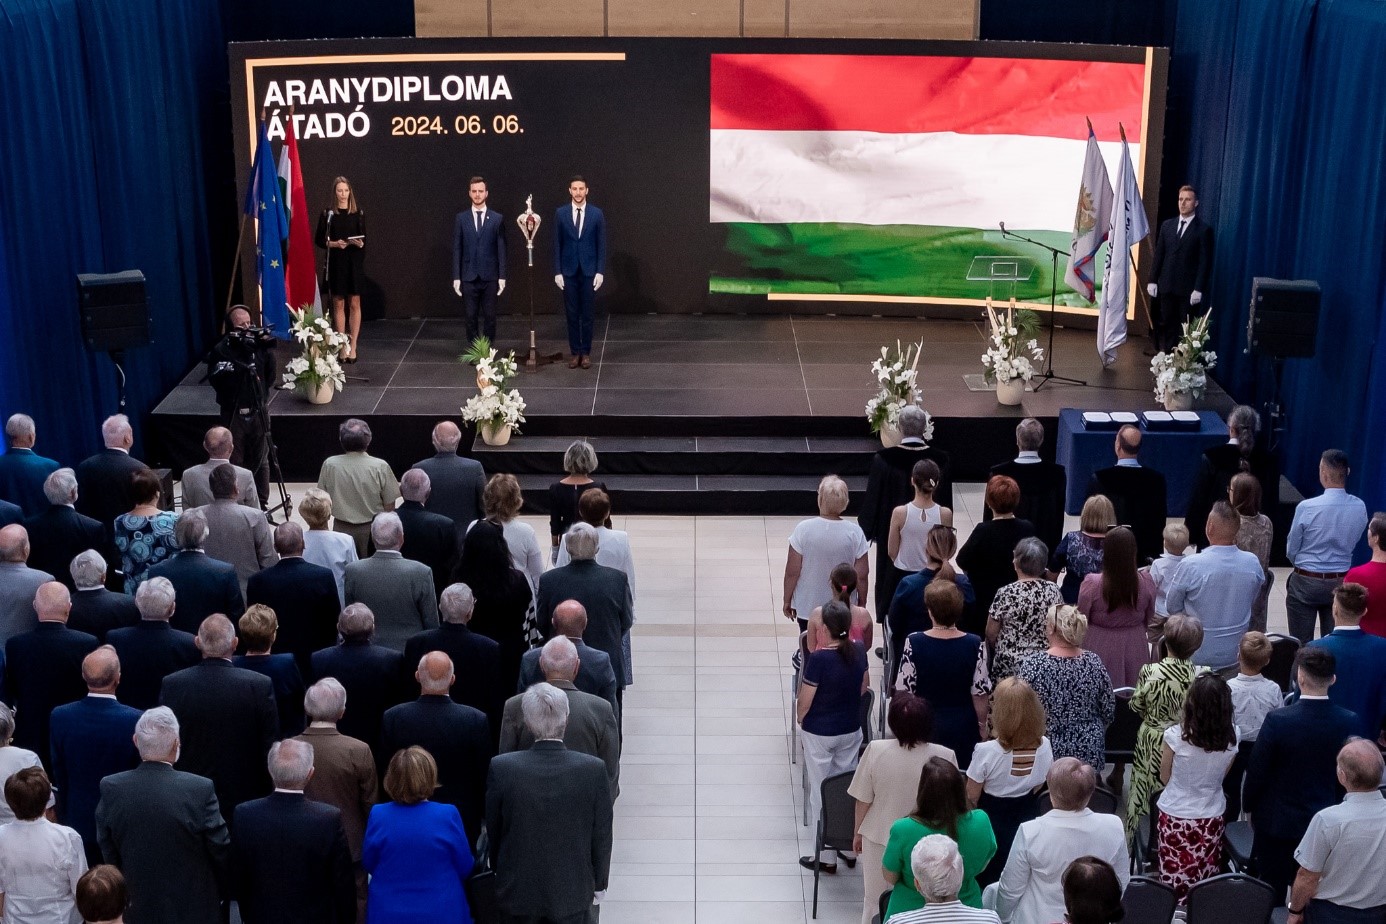 The gold diploma ceremony was held at the New Knowledge Space building on the campus of Széchenyi István University in Győr.